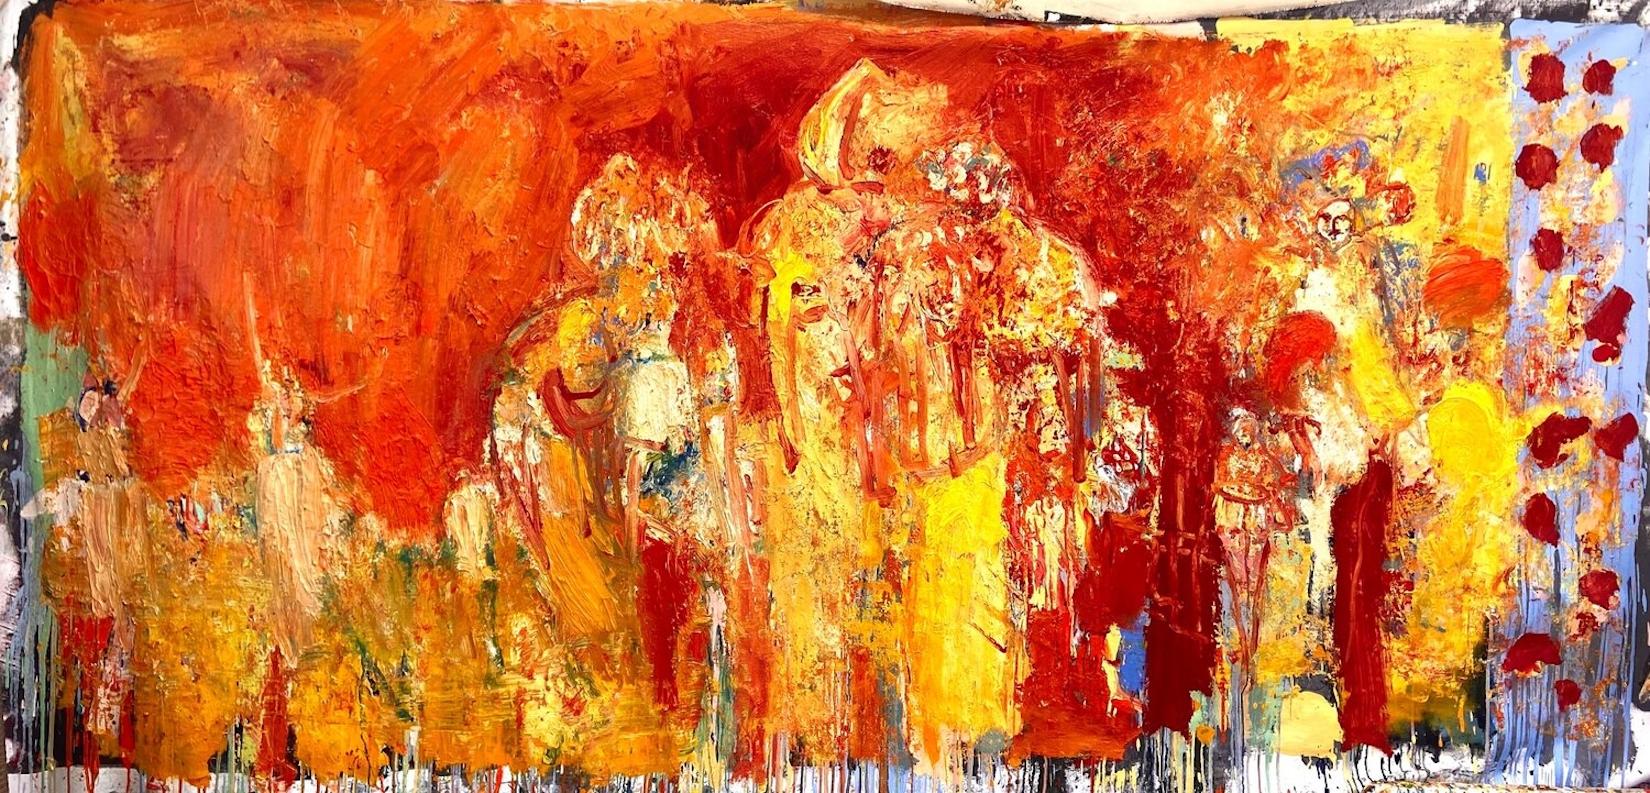 Paul wadsworth Animal Painting - Elephants Have A Festival. Large Abstract Expressionist Oil Painting